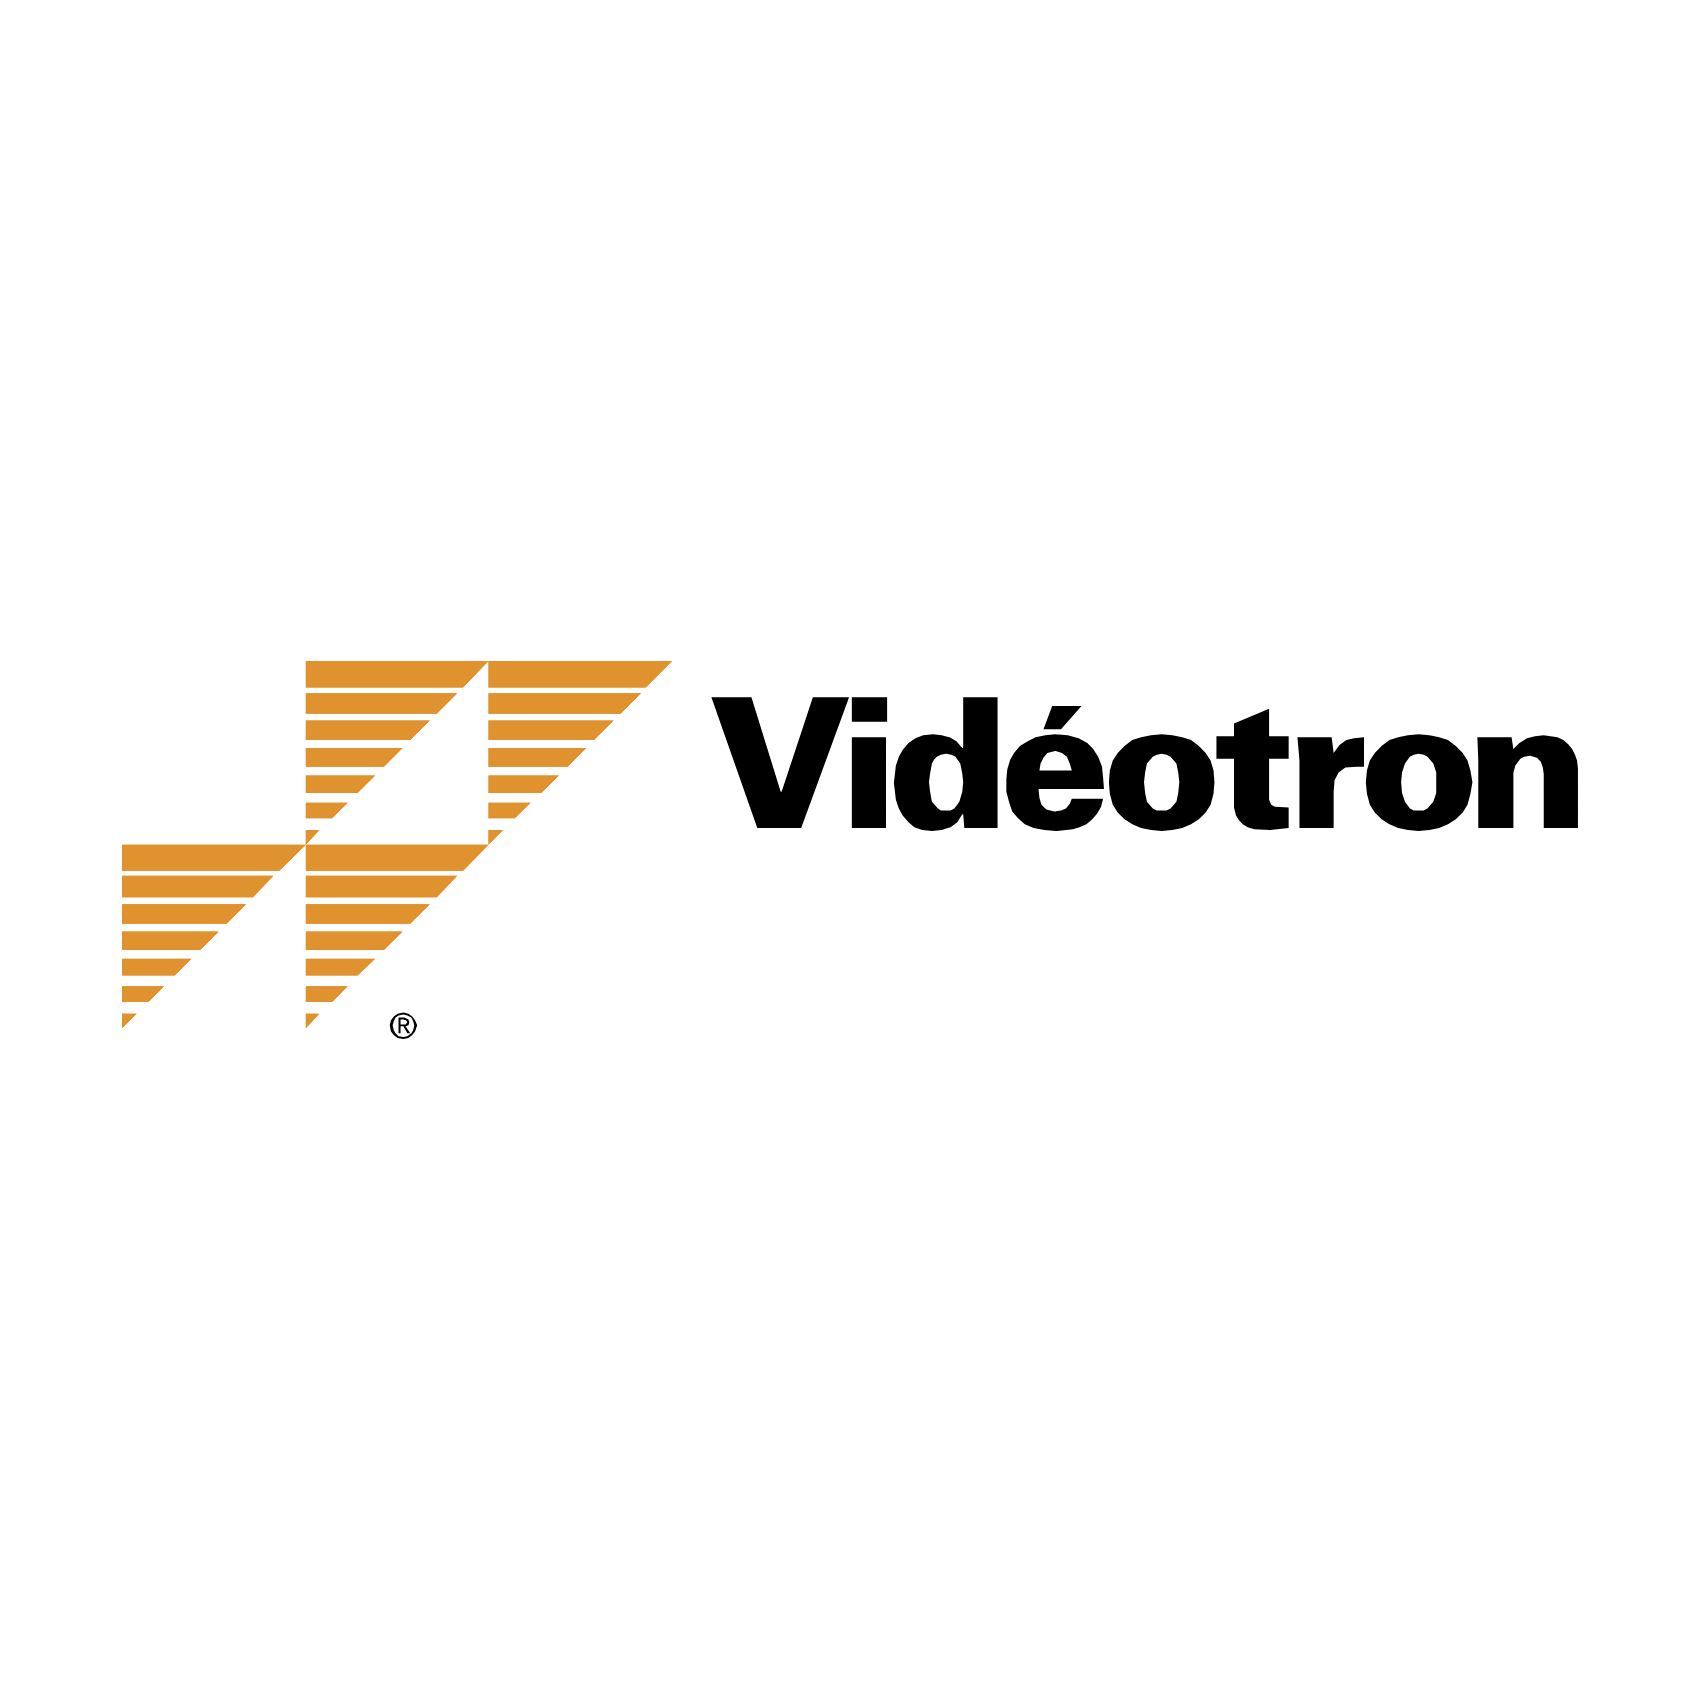 Download Videotron Logo PNG and Vector (PDF, SVG, Ai, EPS) Free